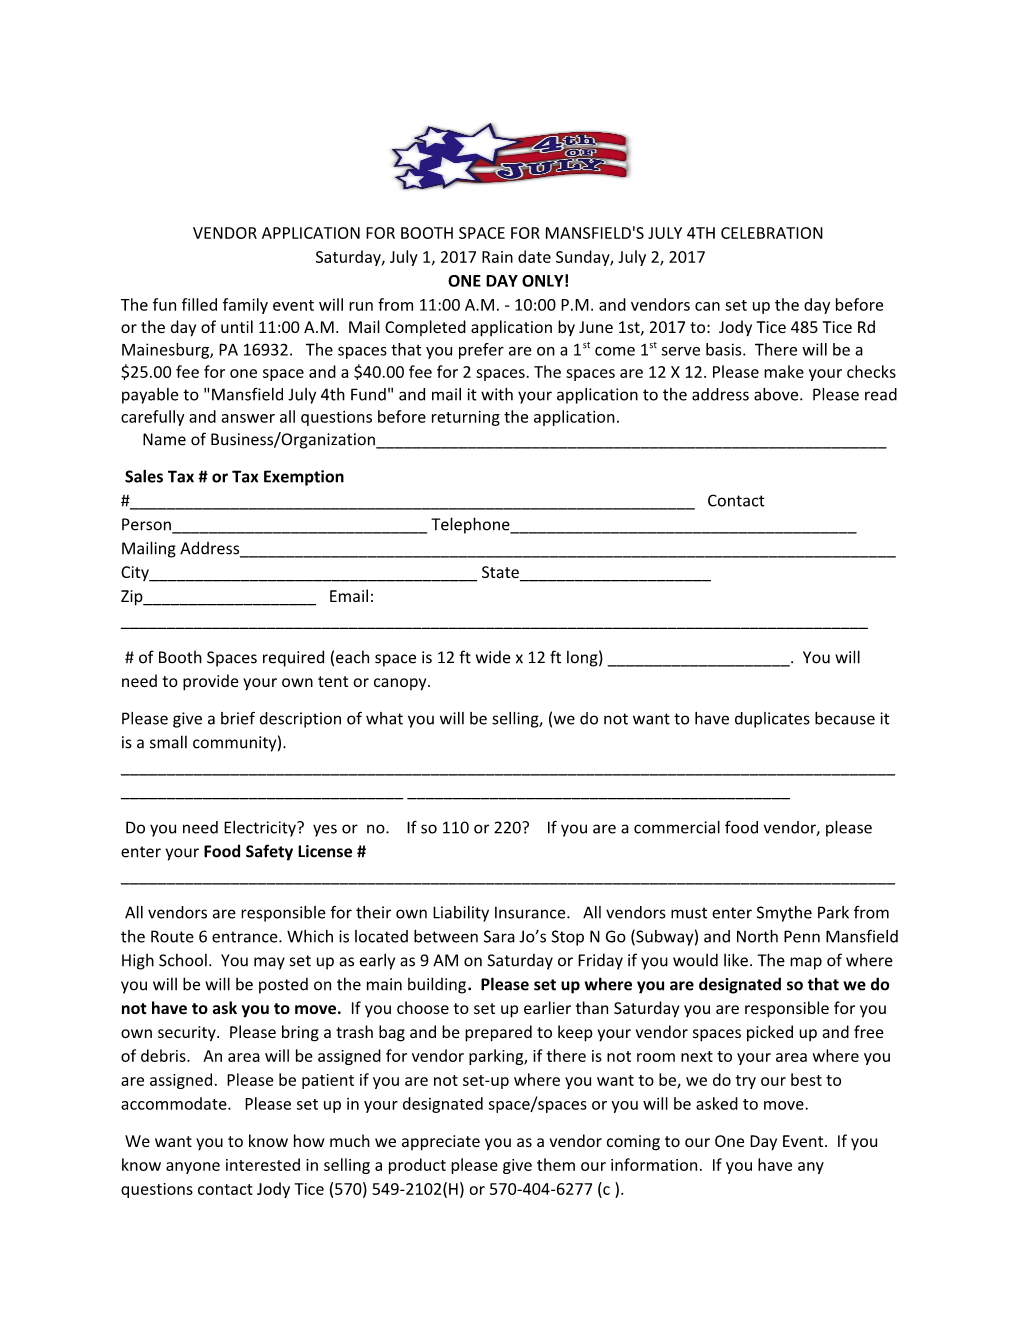 Vendor Application for Booth Space for Mansfield's July 4Th Celebration